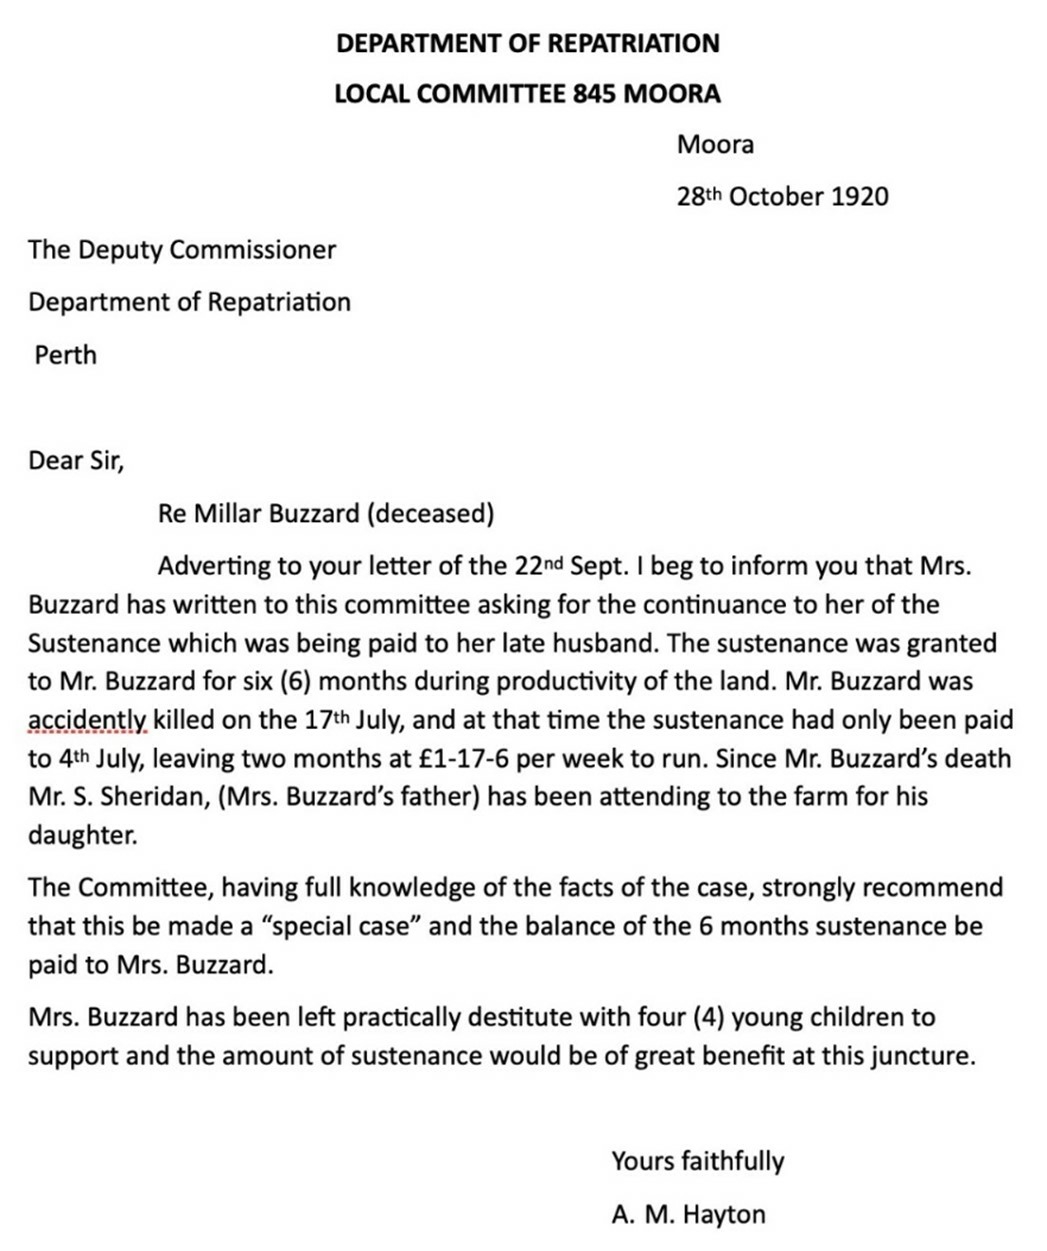 Transcript of Moora Repatriation Committee Letter to Perth Head Office